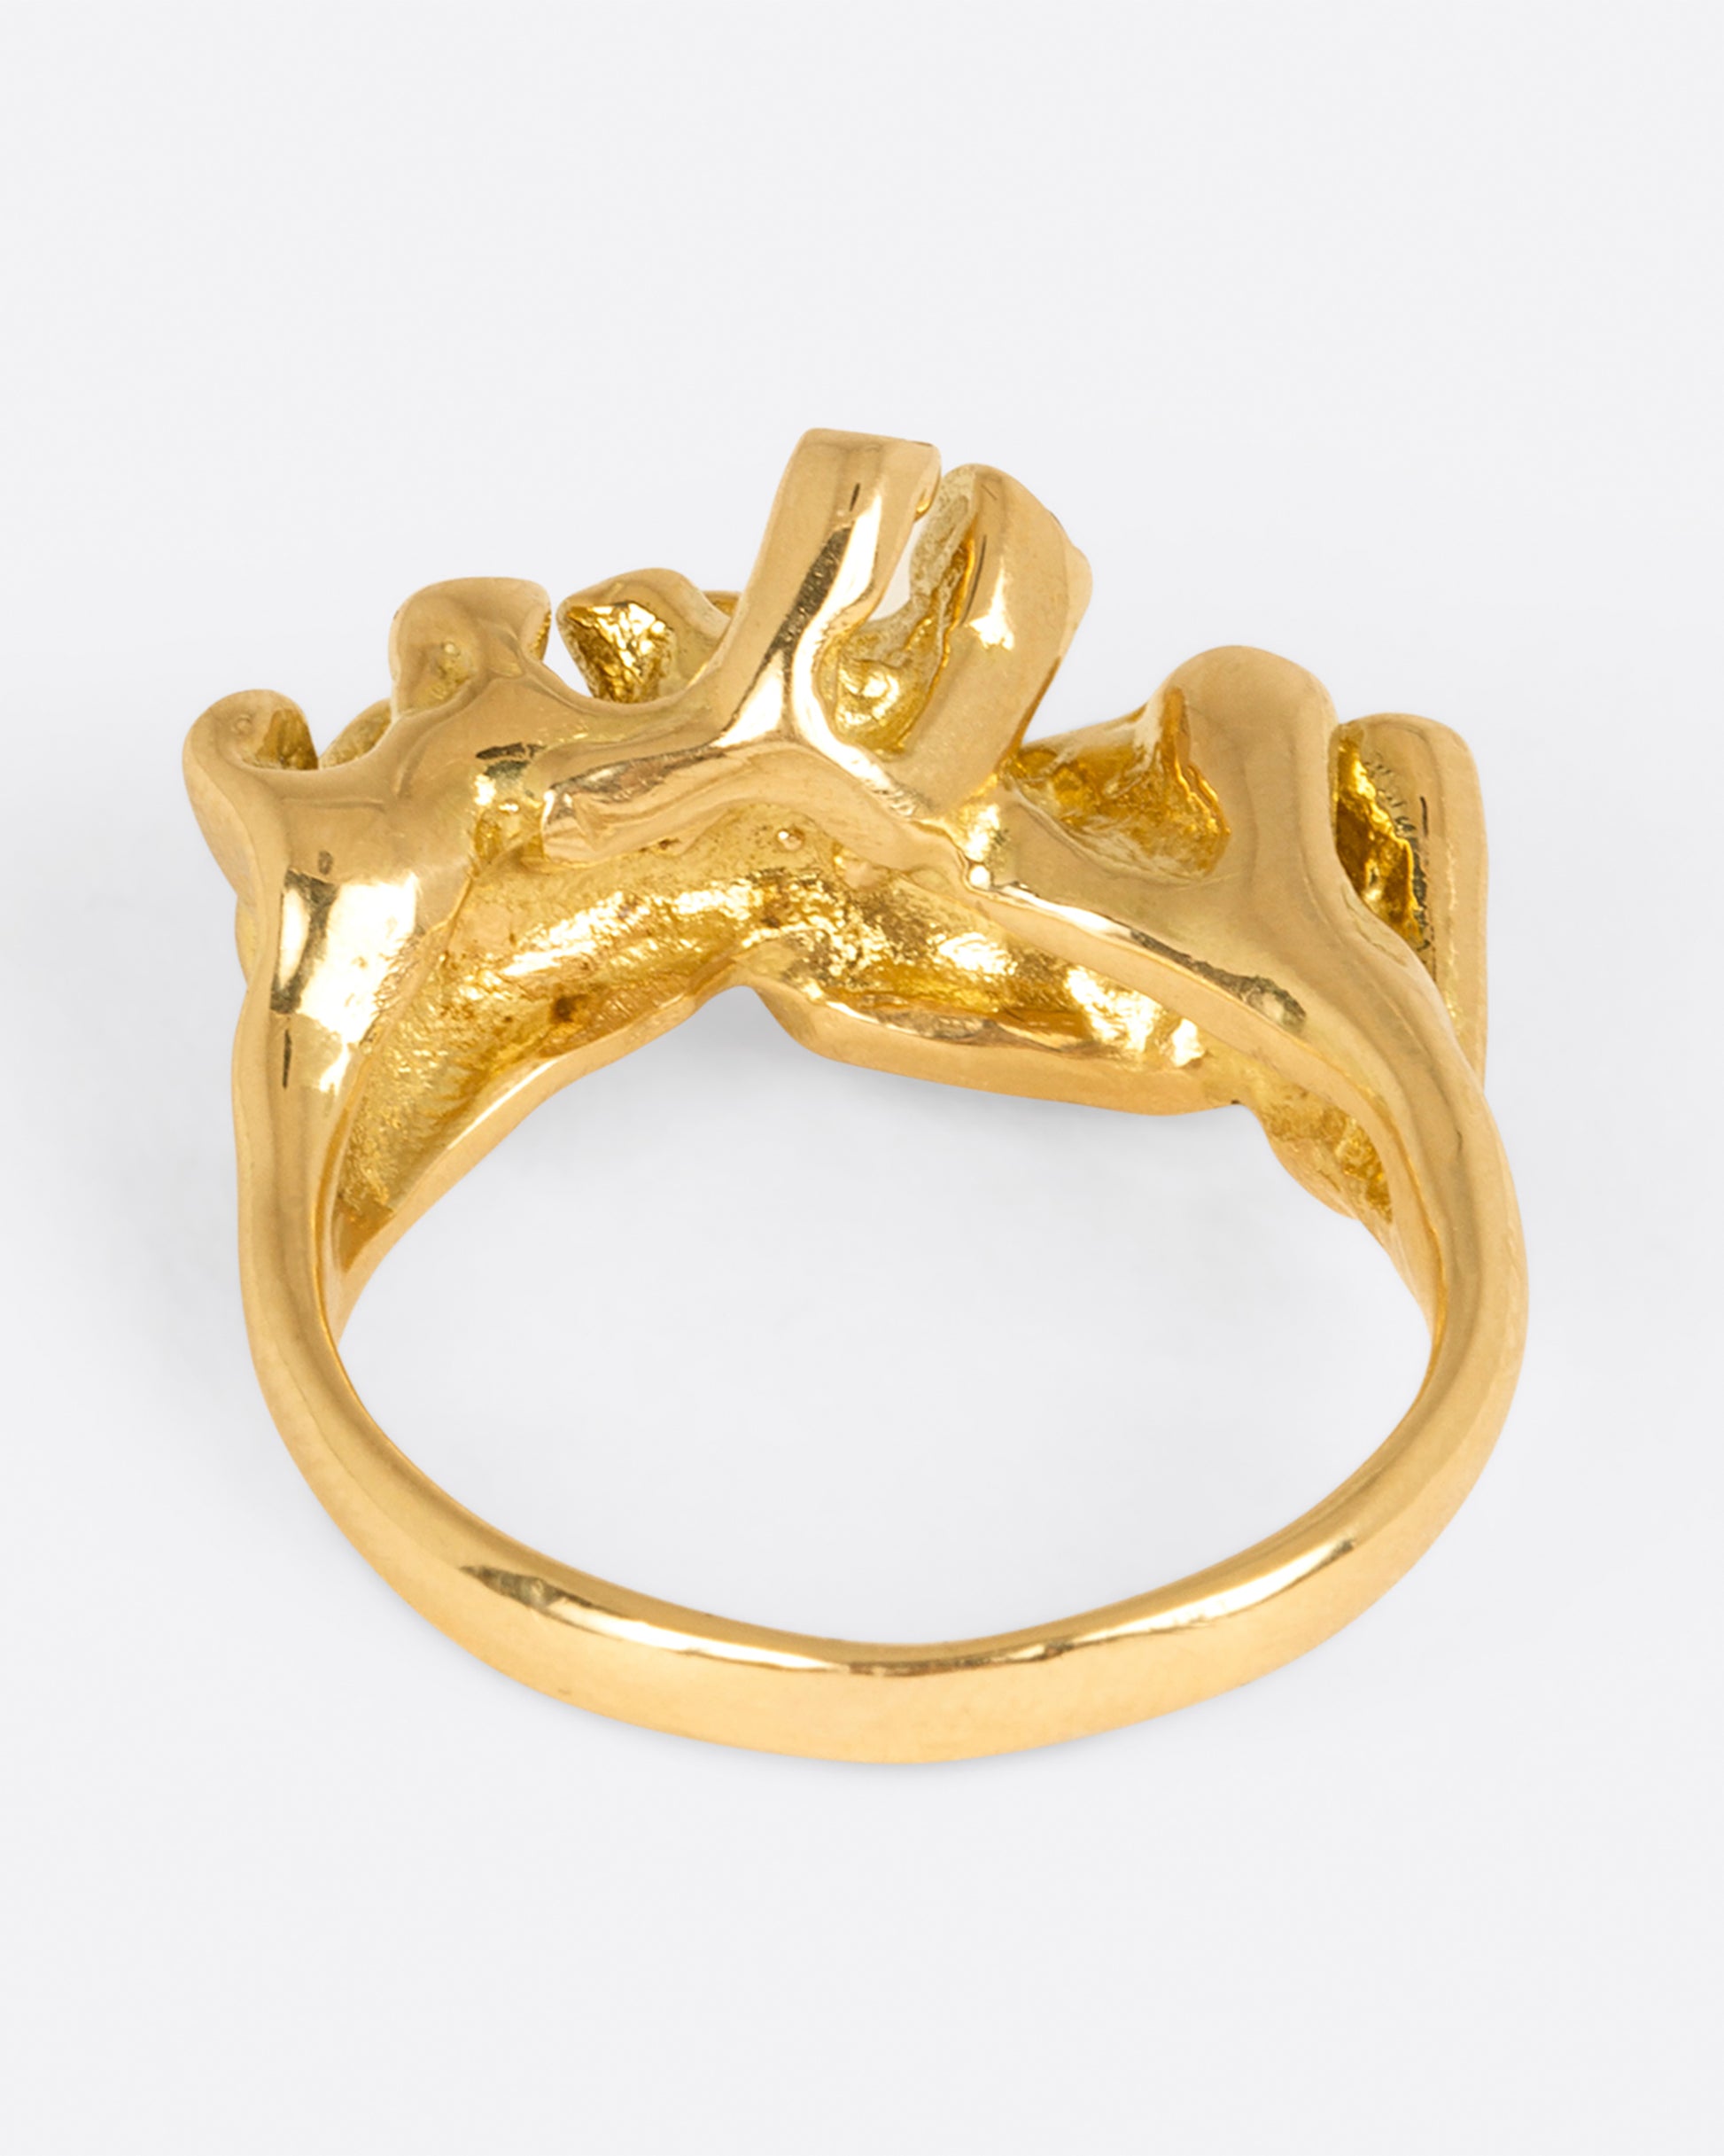 A yellow gold ring with sea anemone tentacles, dotted with diamonds, shown from back.